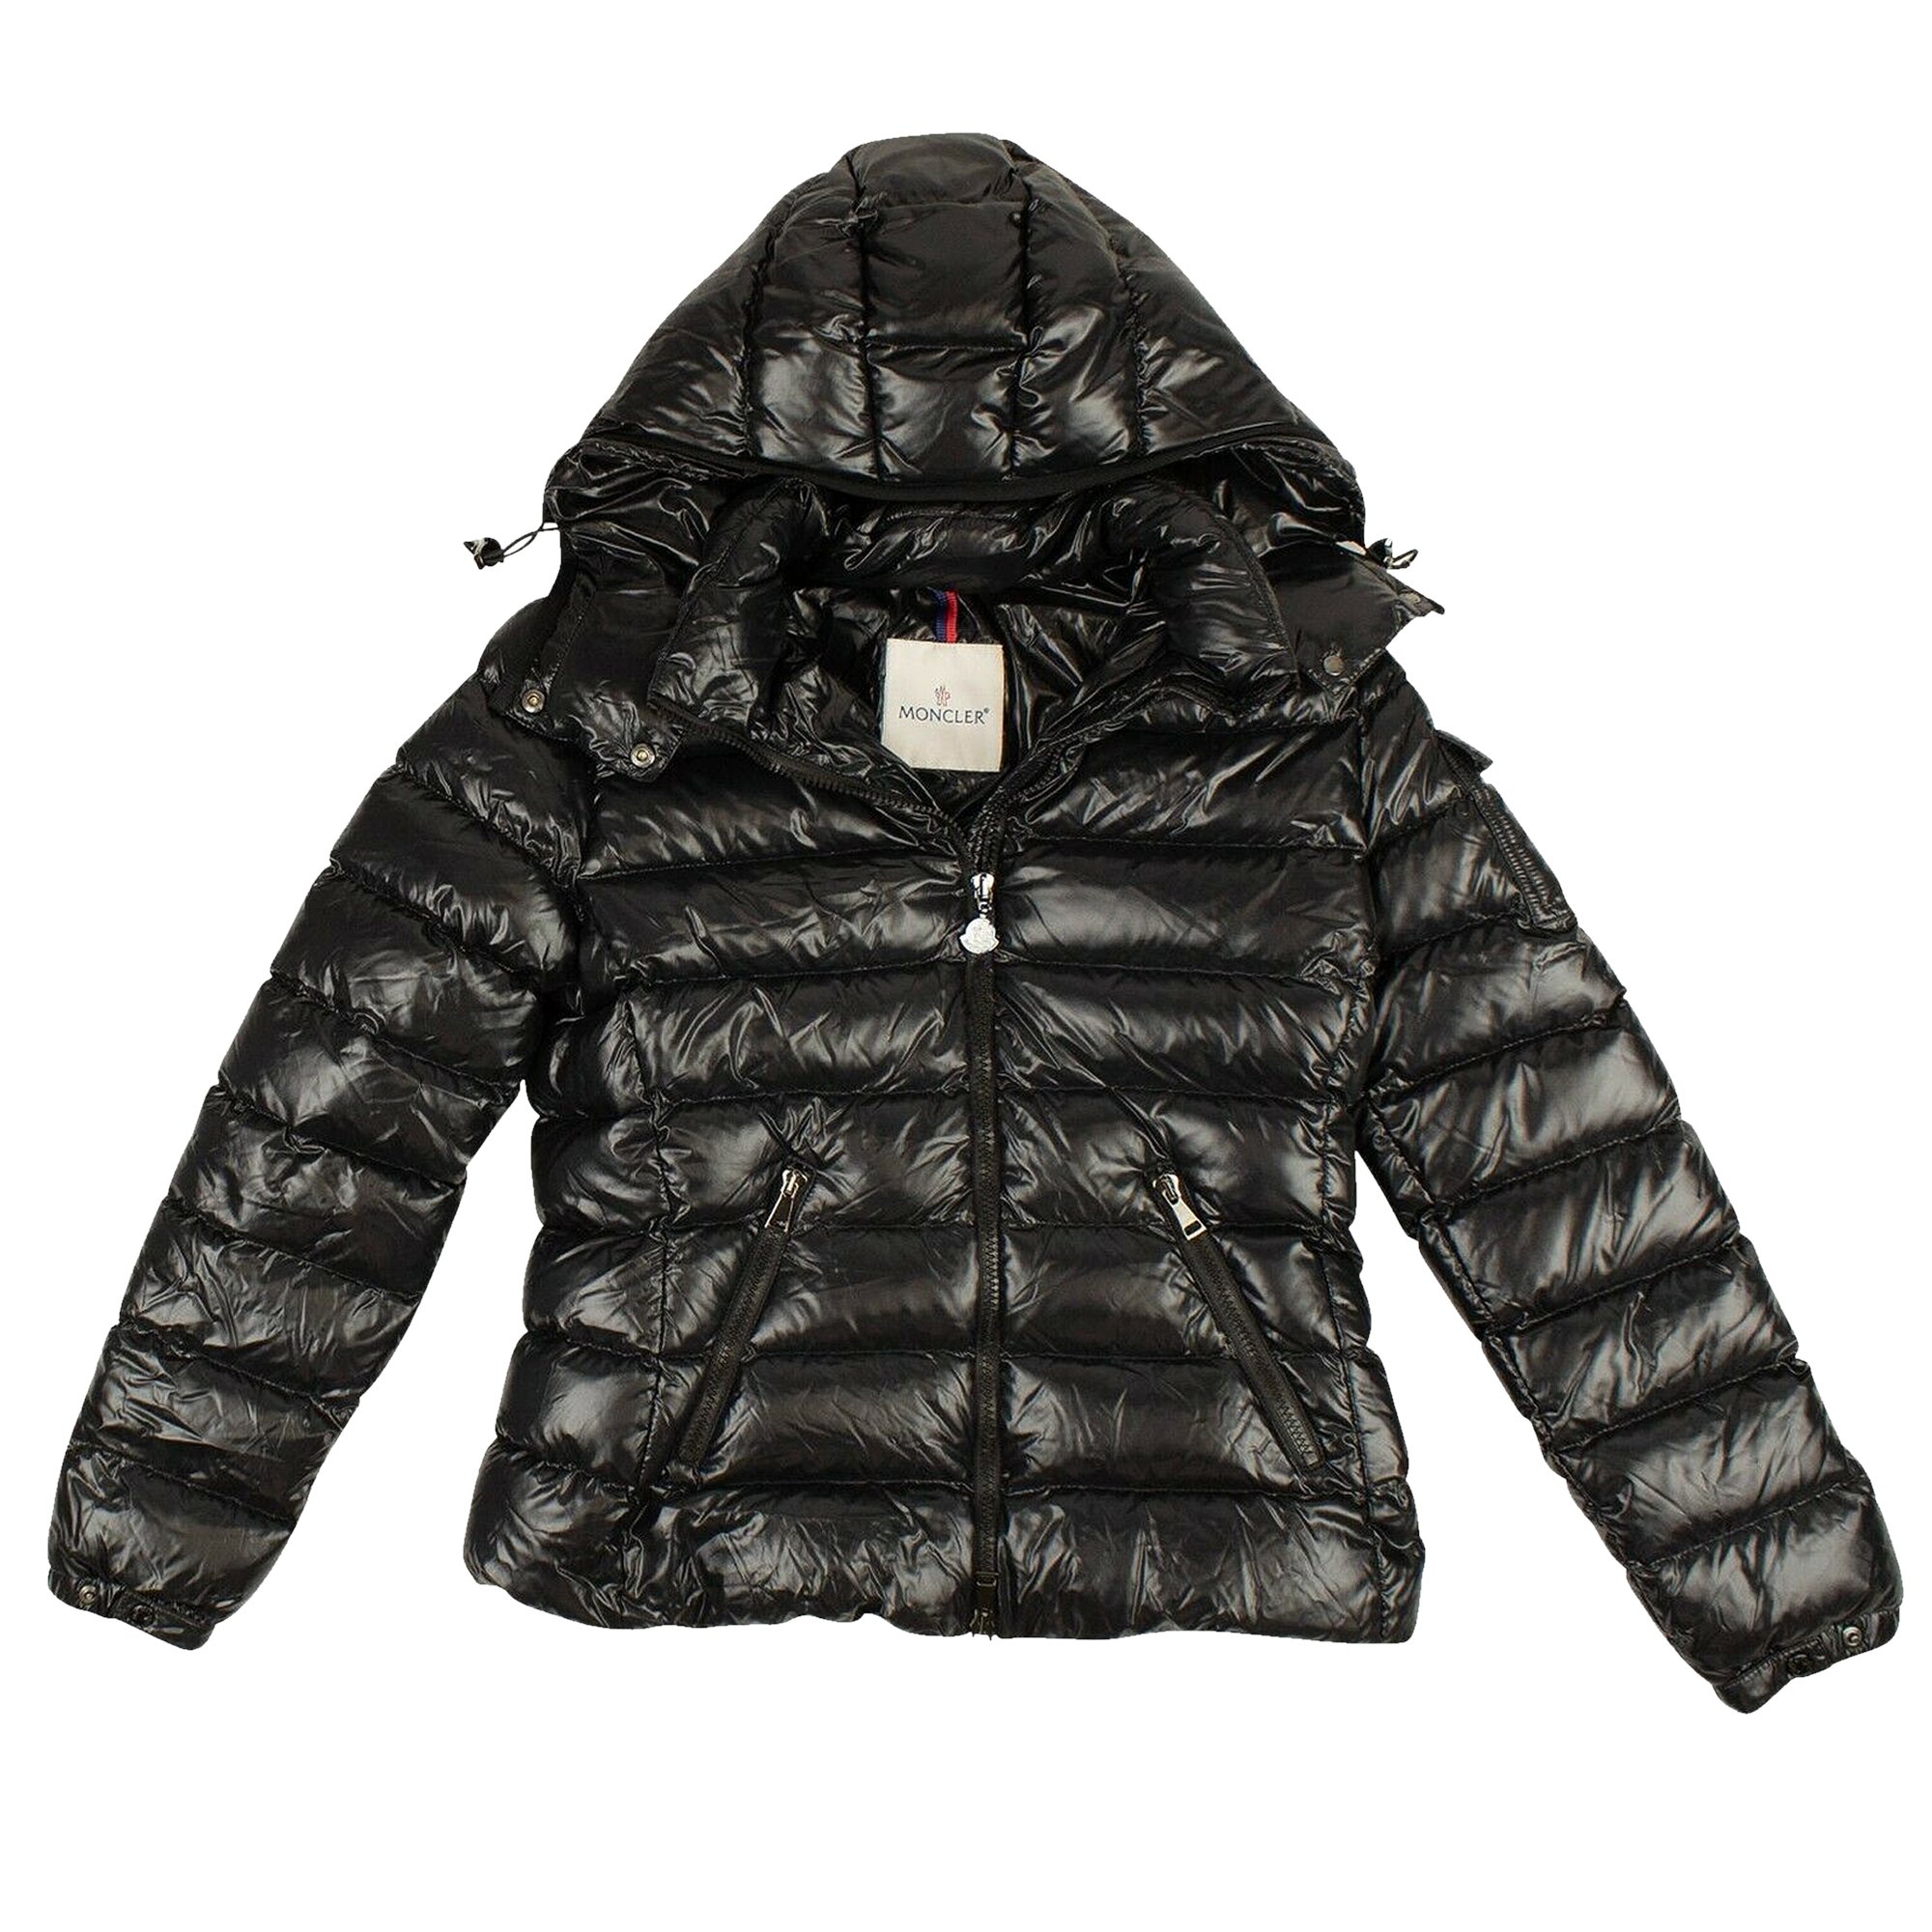 Buy Moncler Bady Giubbotto Down Puffer Jacket 'Black